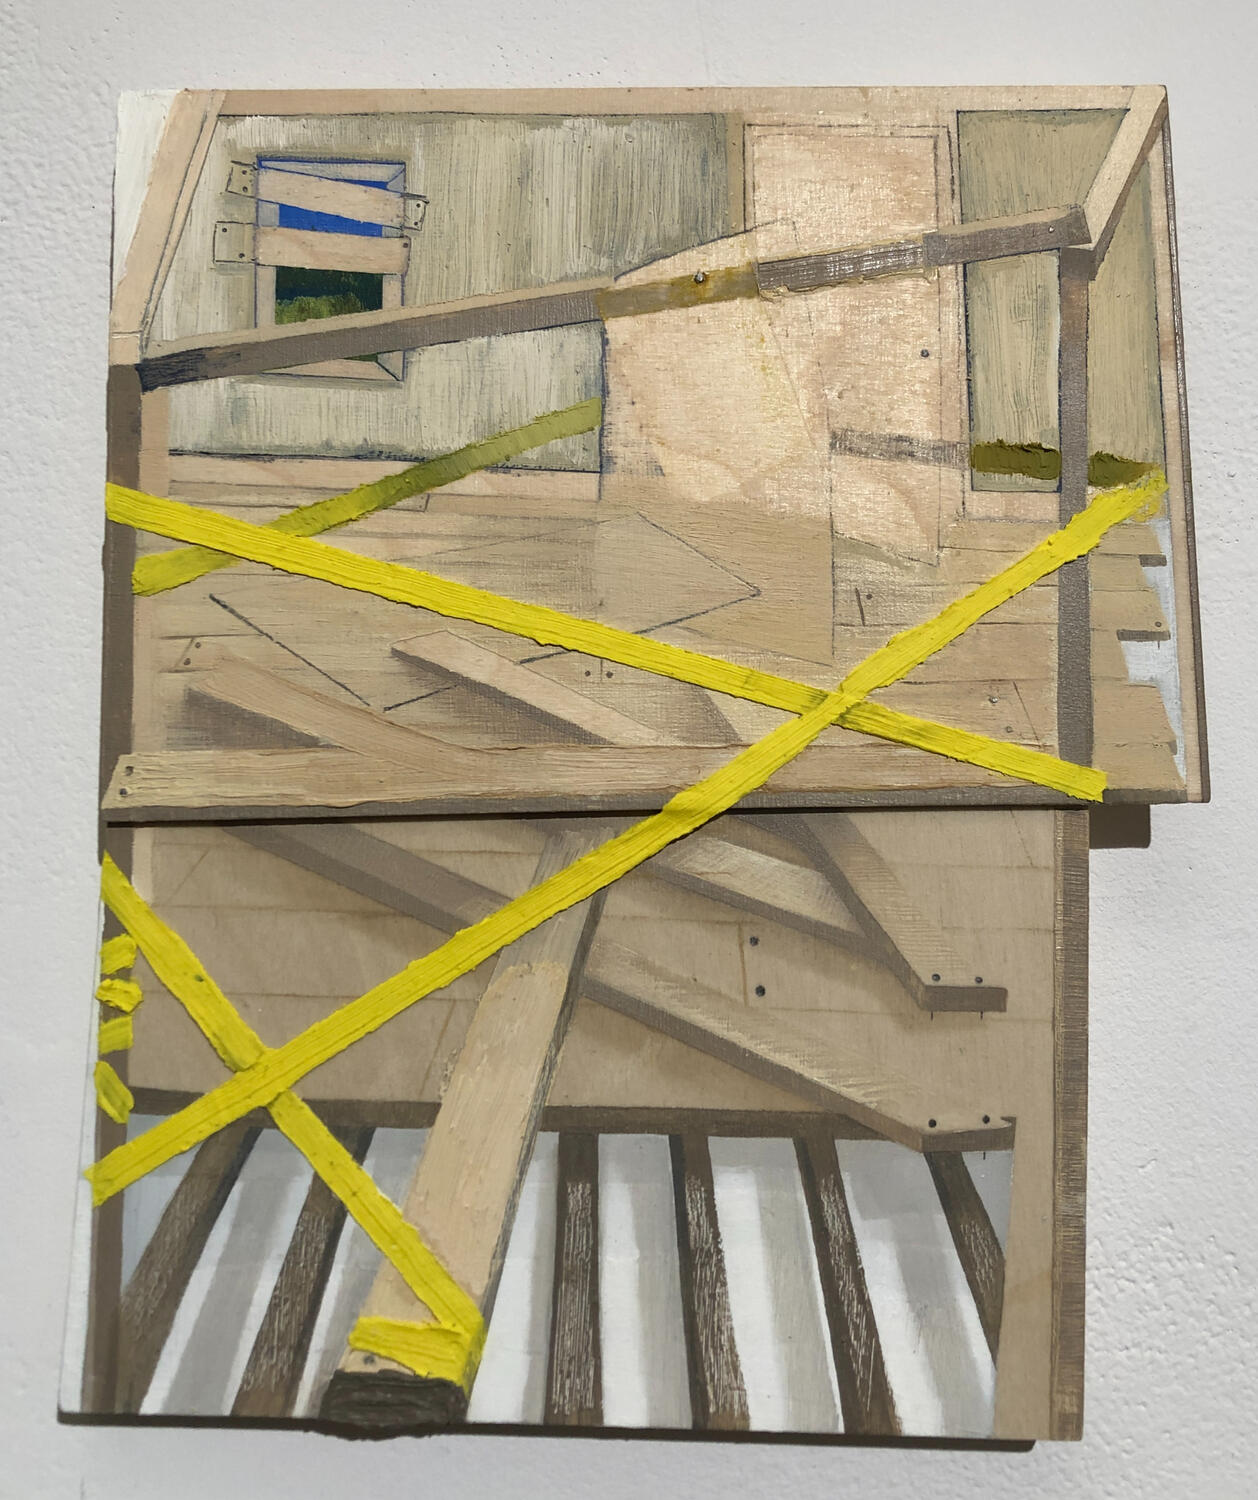 Caution. 2022. Oil paint and graphite on wood panels. 11 x 9 inches.